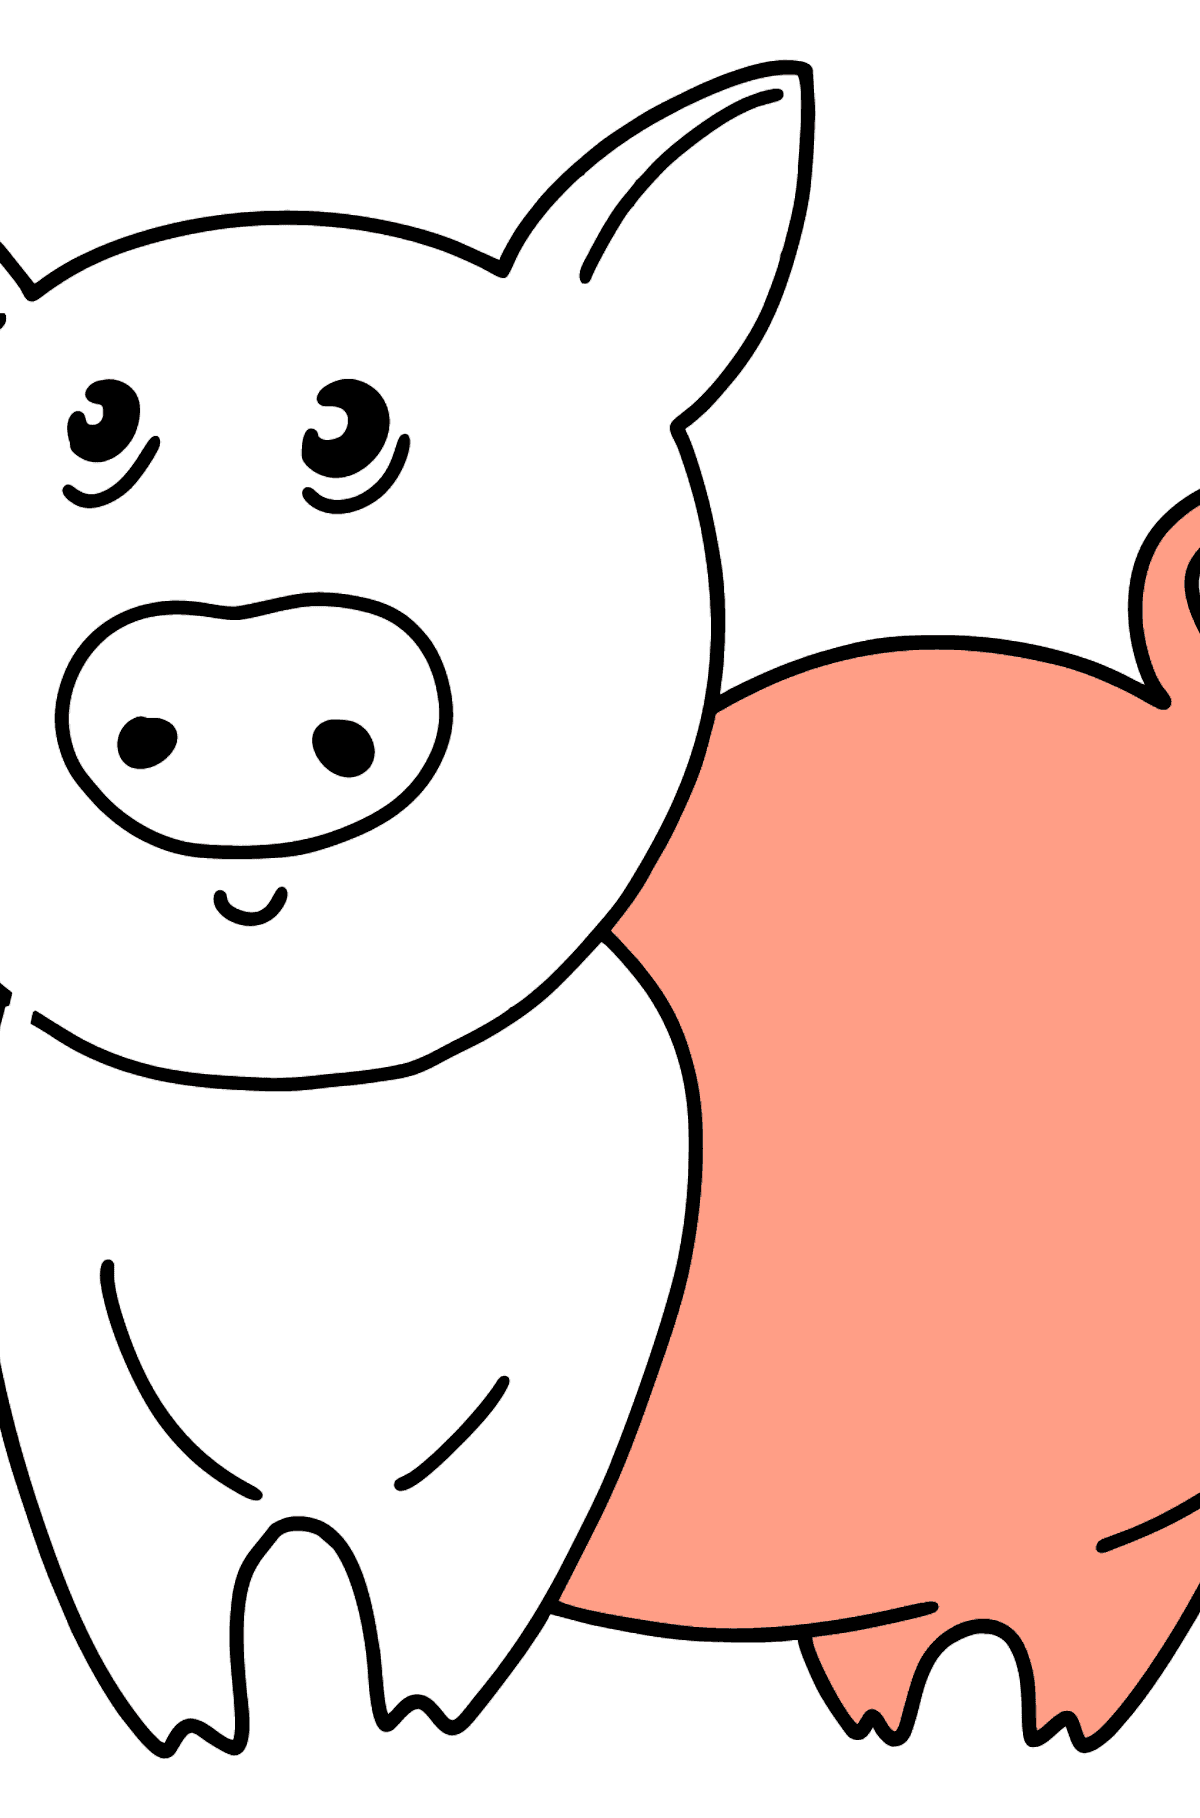 Piglet coloring page - Coloring Pages for Kids